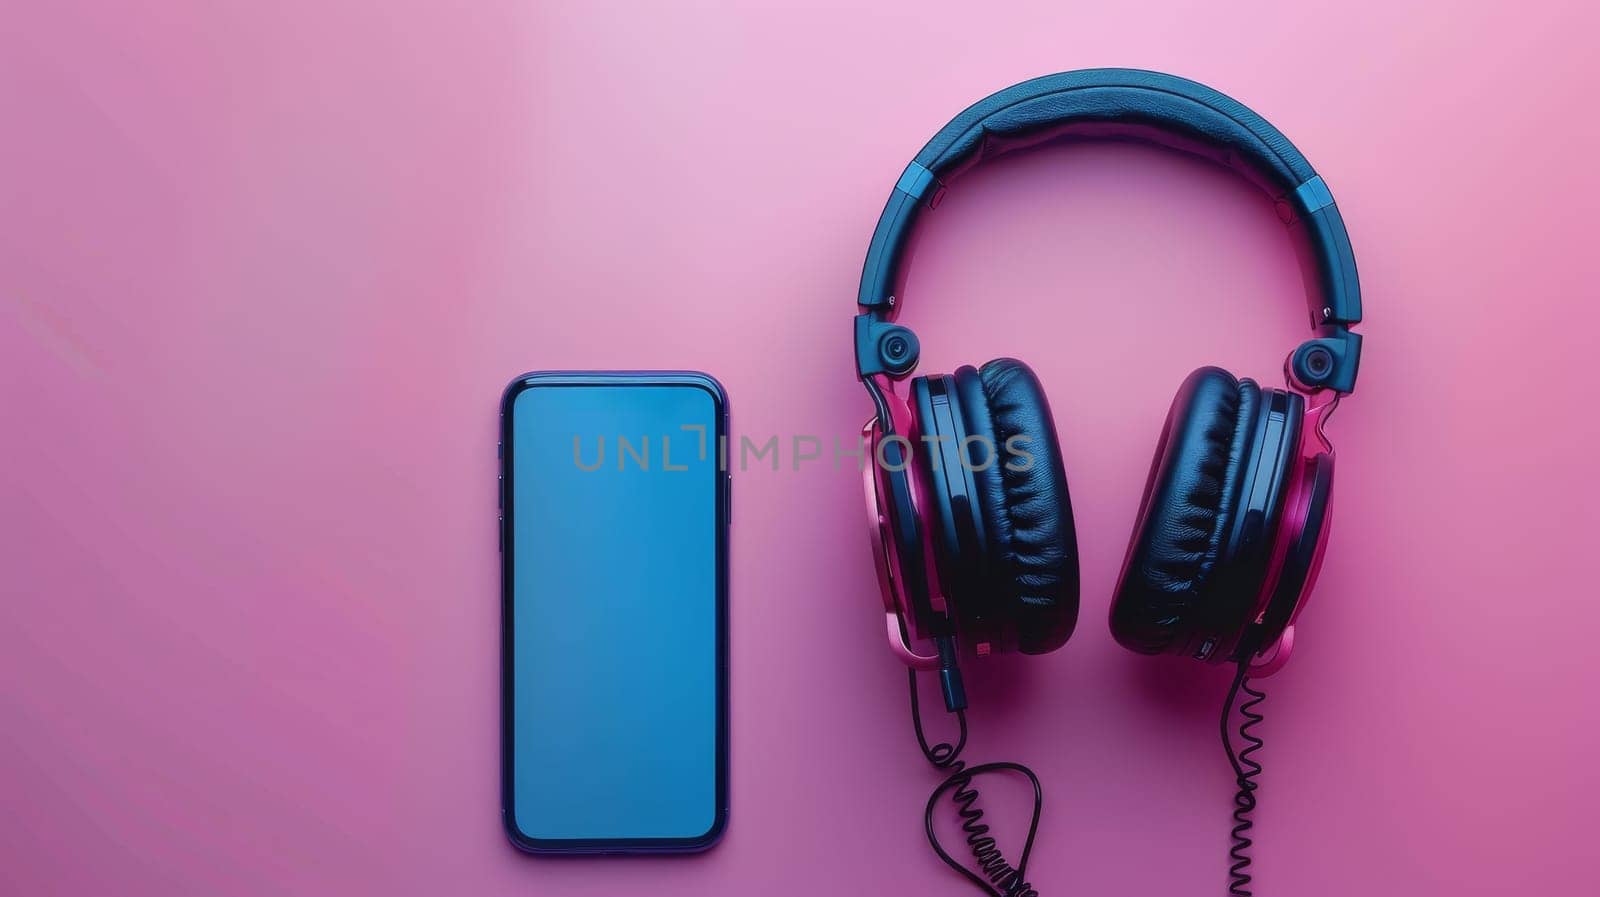 A phone and headphones are on a pink background.